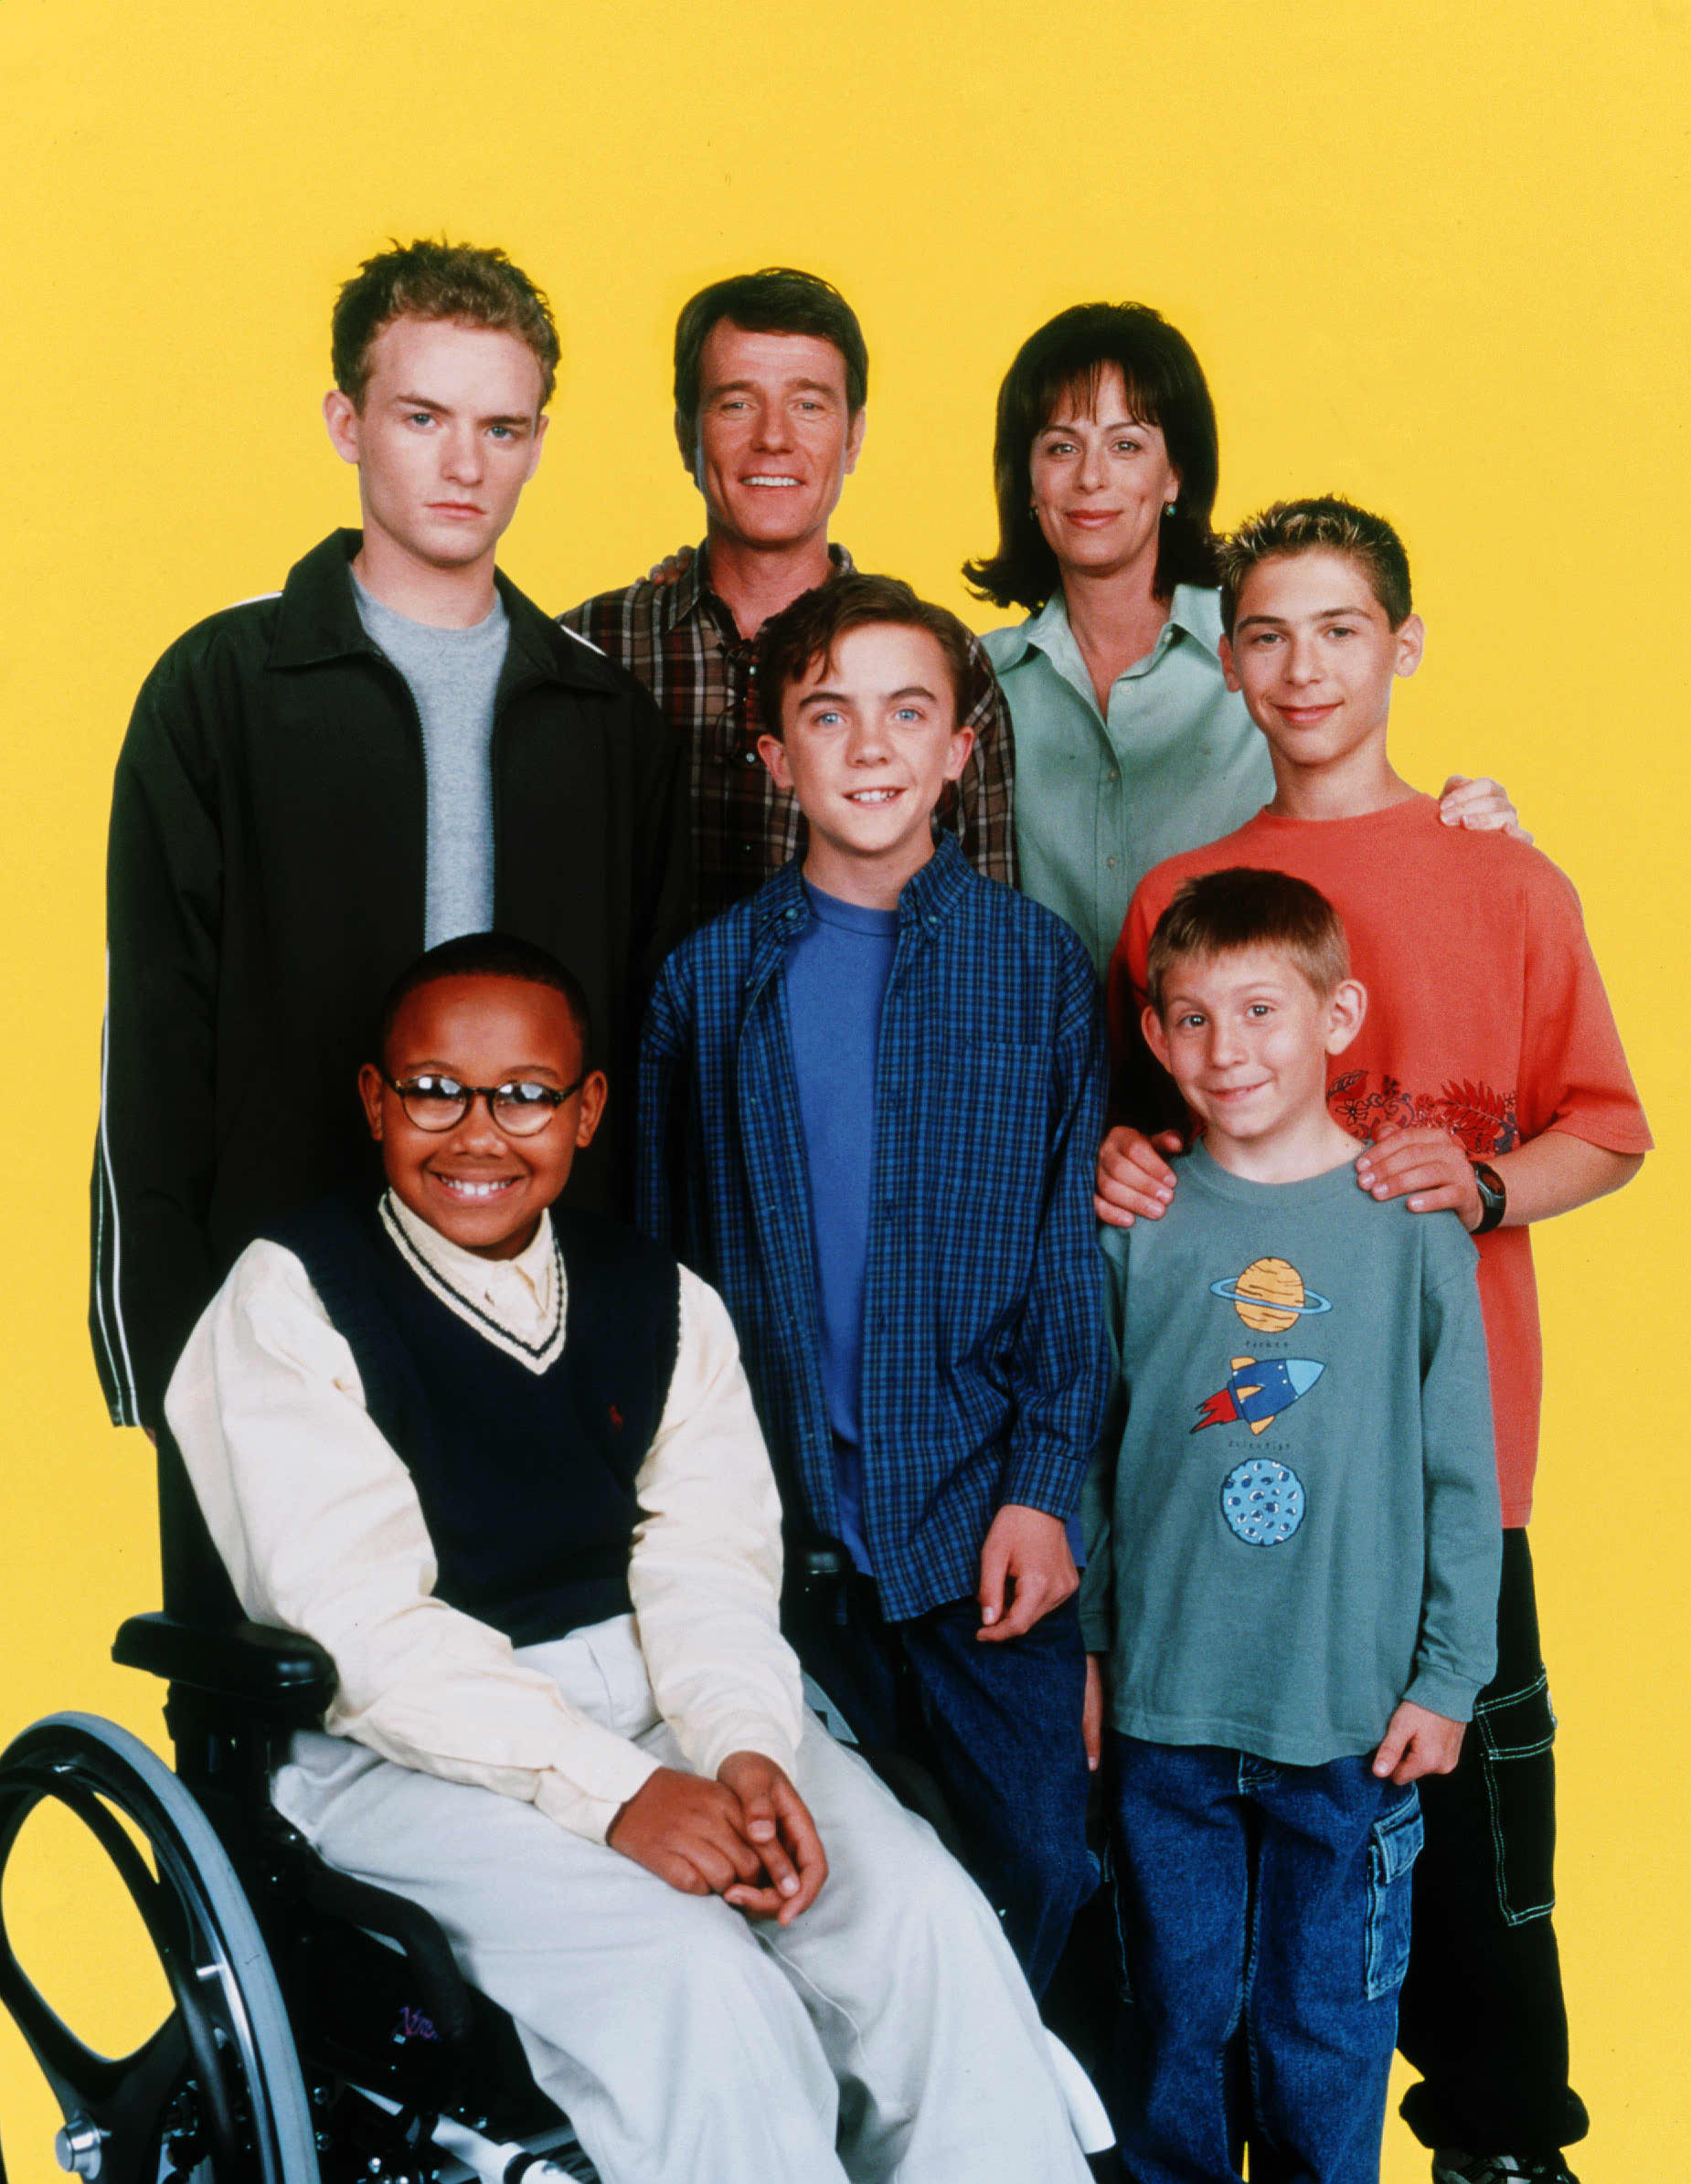 Frankie starred on the Fox sitcom, Malcolm in the Middle, from 2001 to 2006